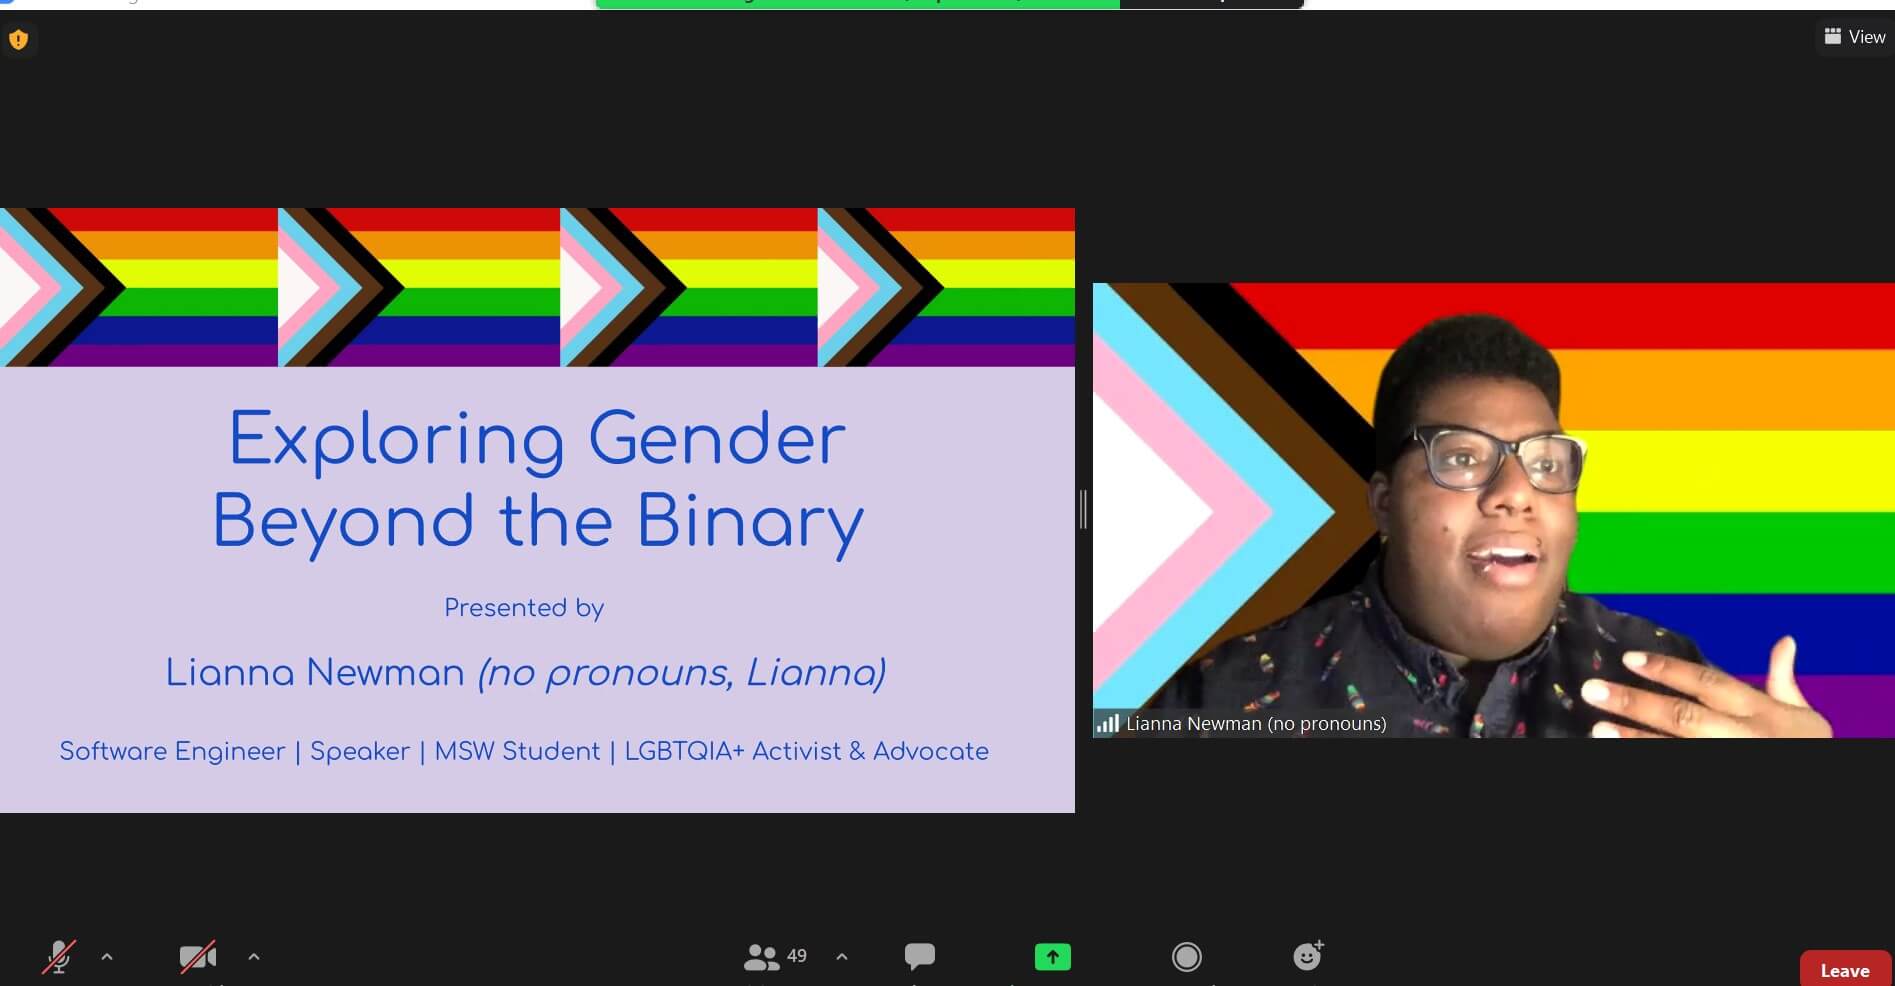 A screenshot of a Zoom meeting where speaker Lianna Newman presents on exploring gender beyond the binary